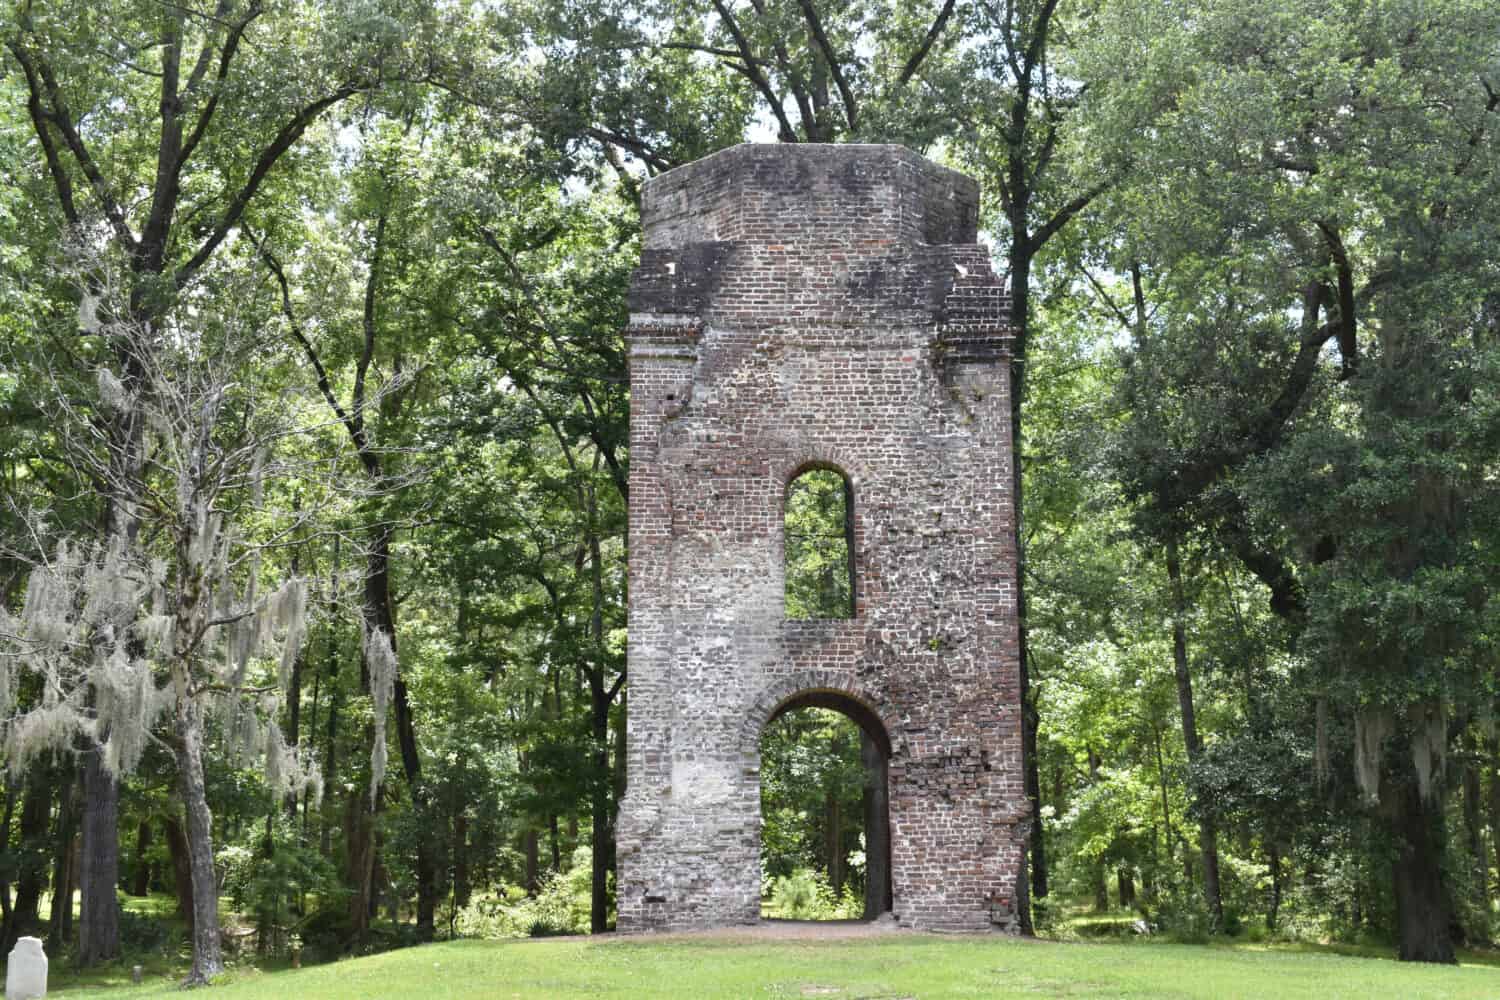 St. George Bell Tower built in 1751 at the Colonial Dorchester State Historic Site in South Carolina. 